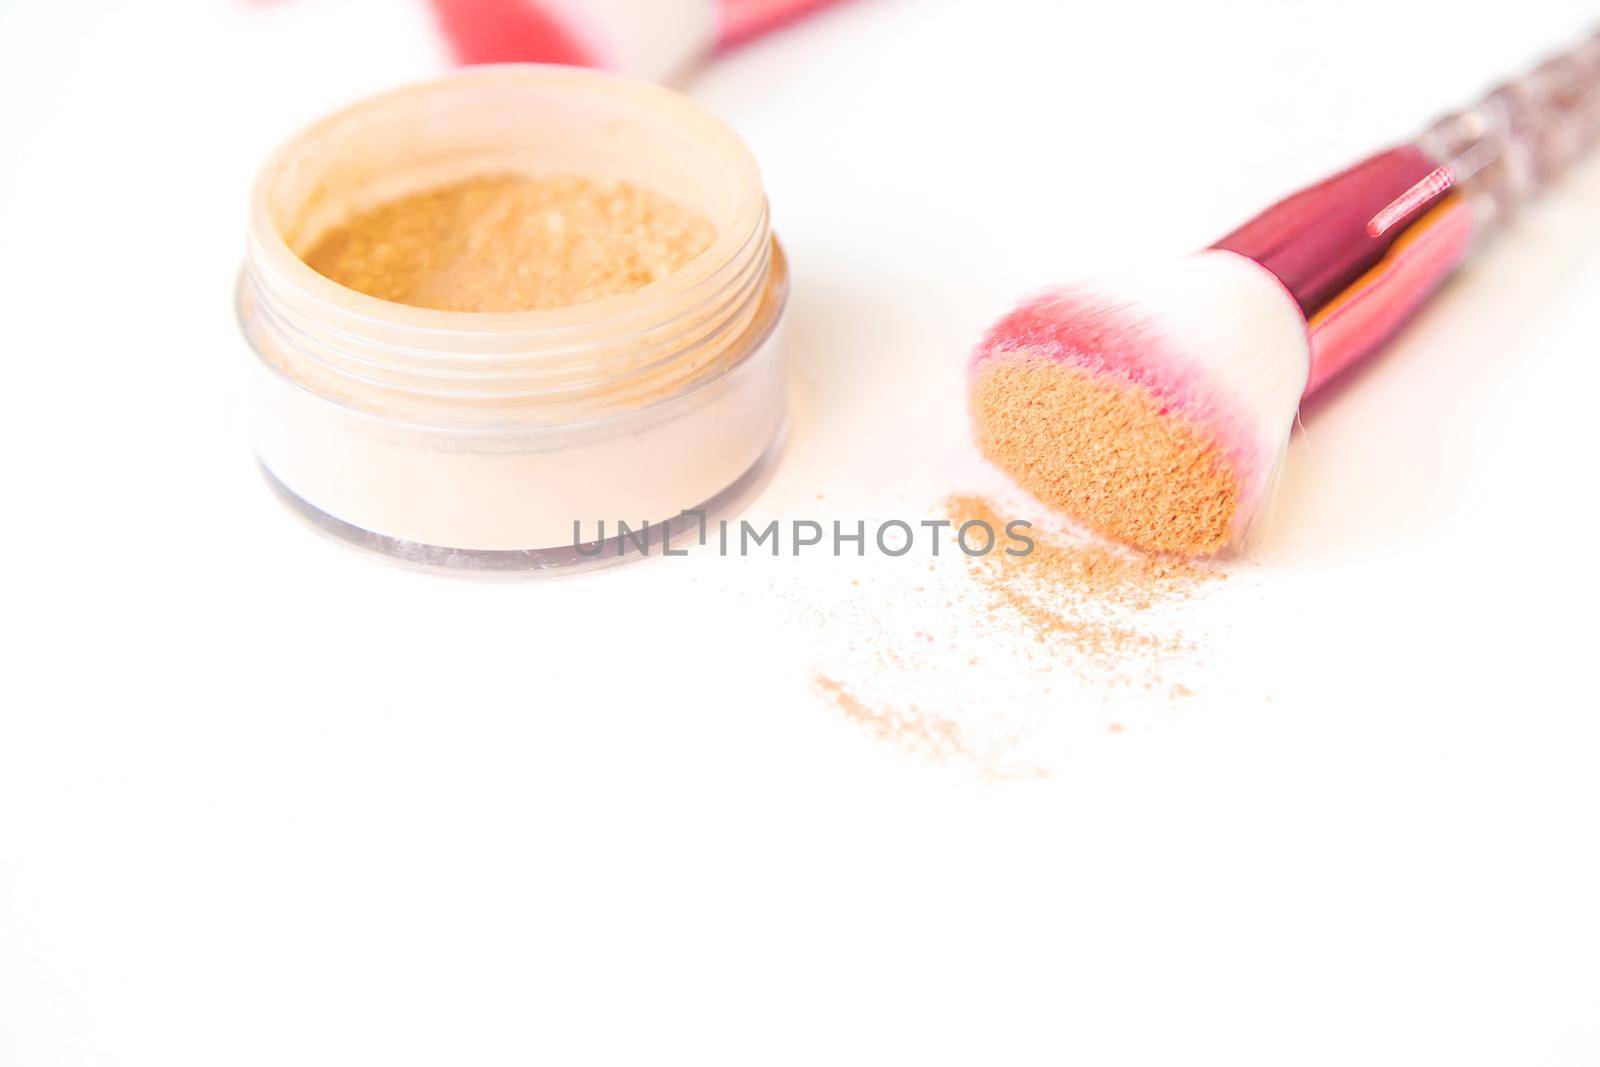 Makeup brushes and powder on a white background. Selective focus. by mila1784